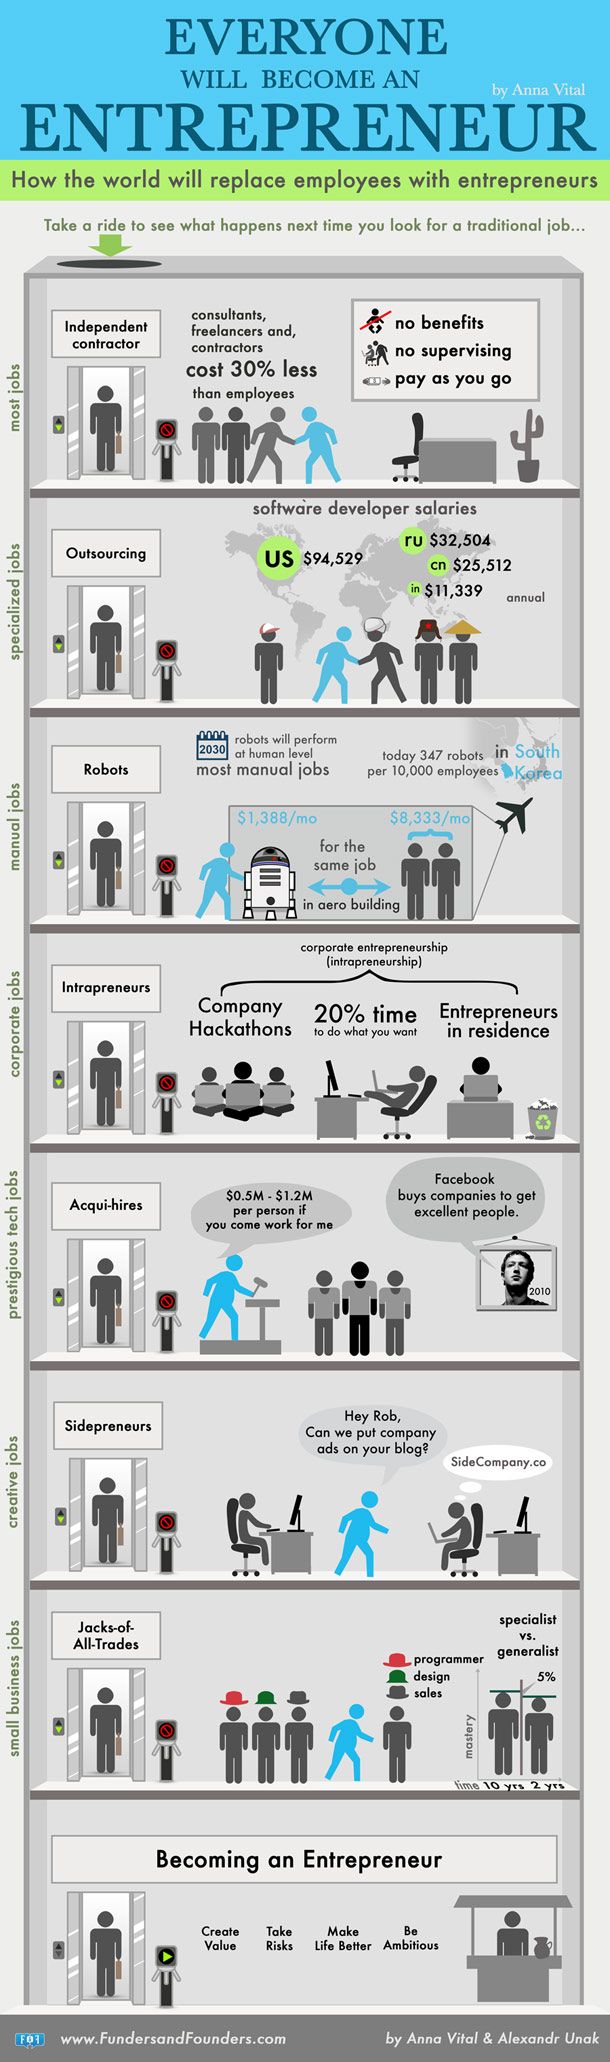 Why Everyone Will Have to Become an Entrepreneur (Infographic) | Entrepreneur